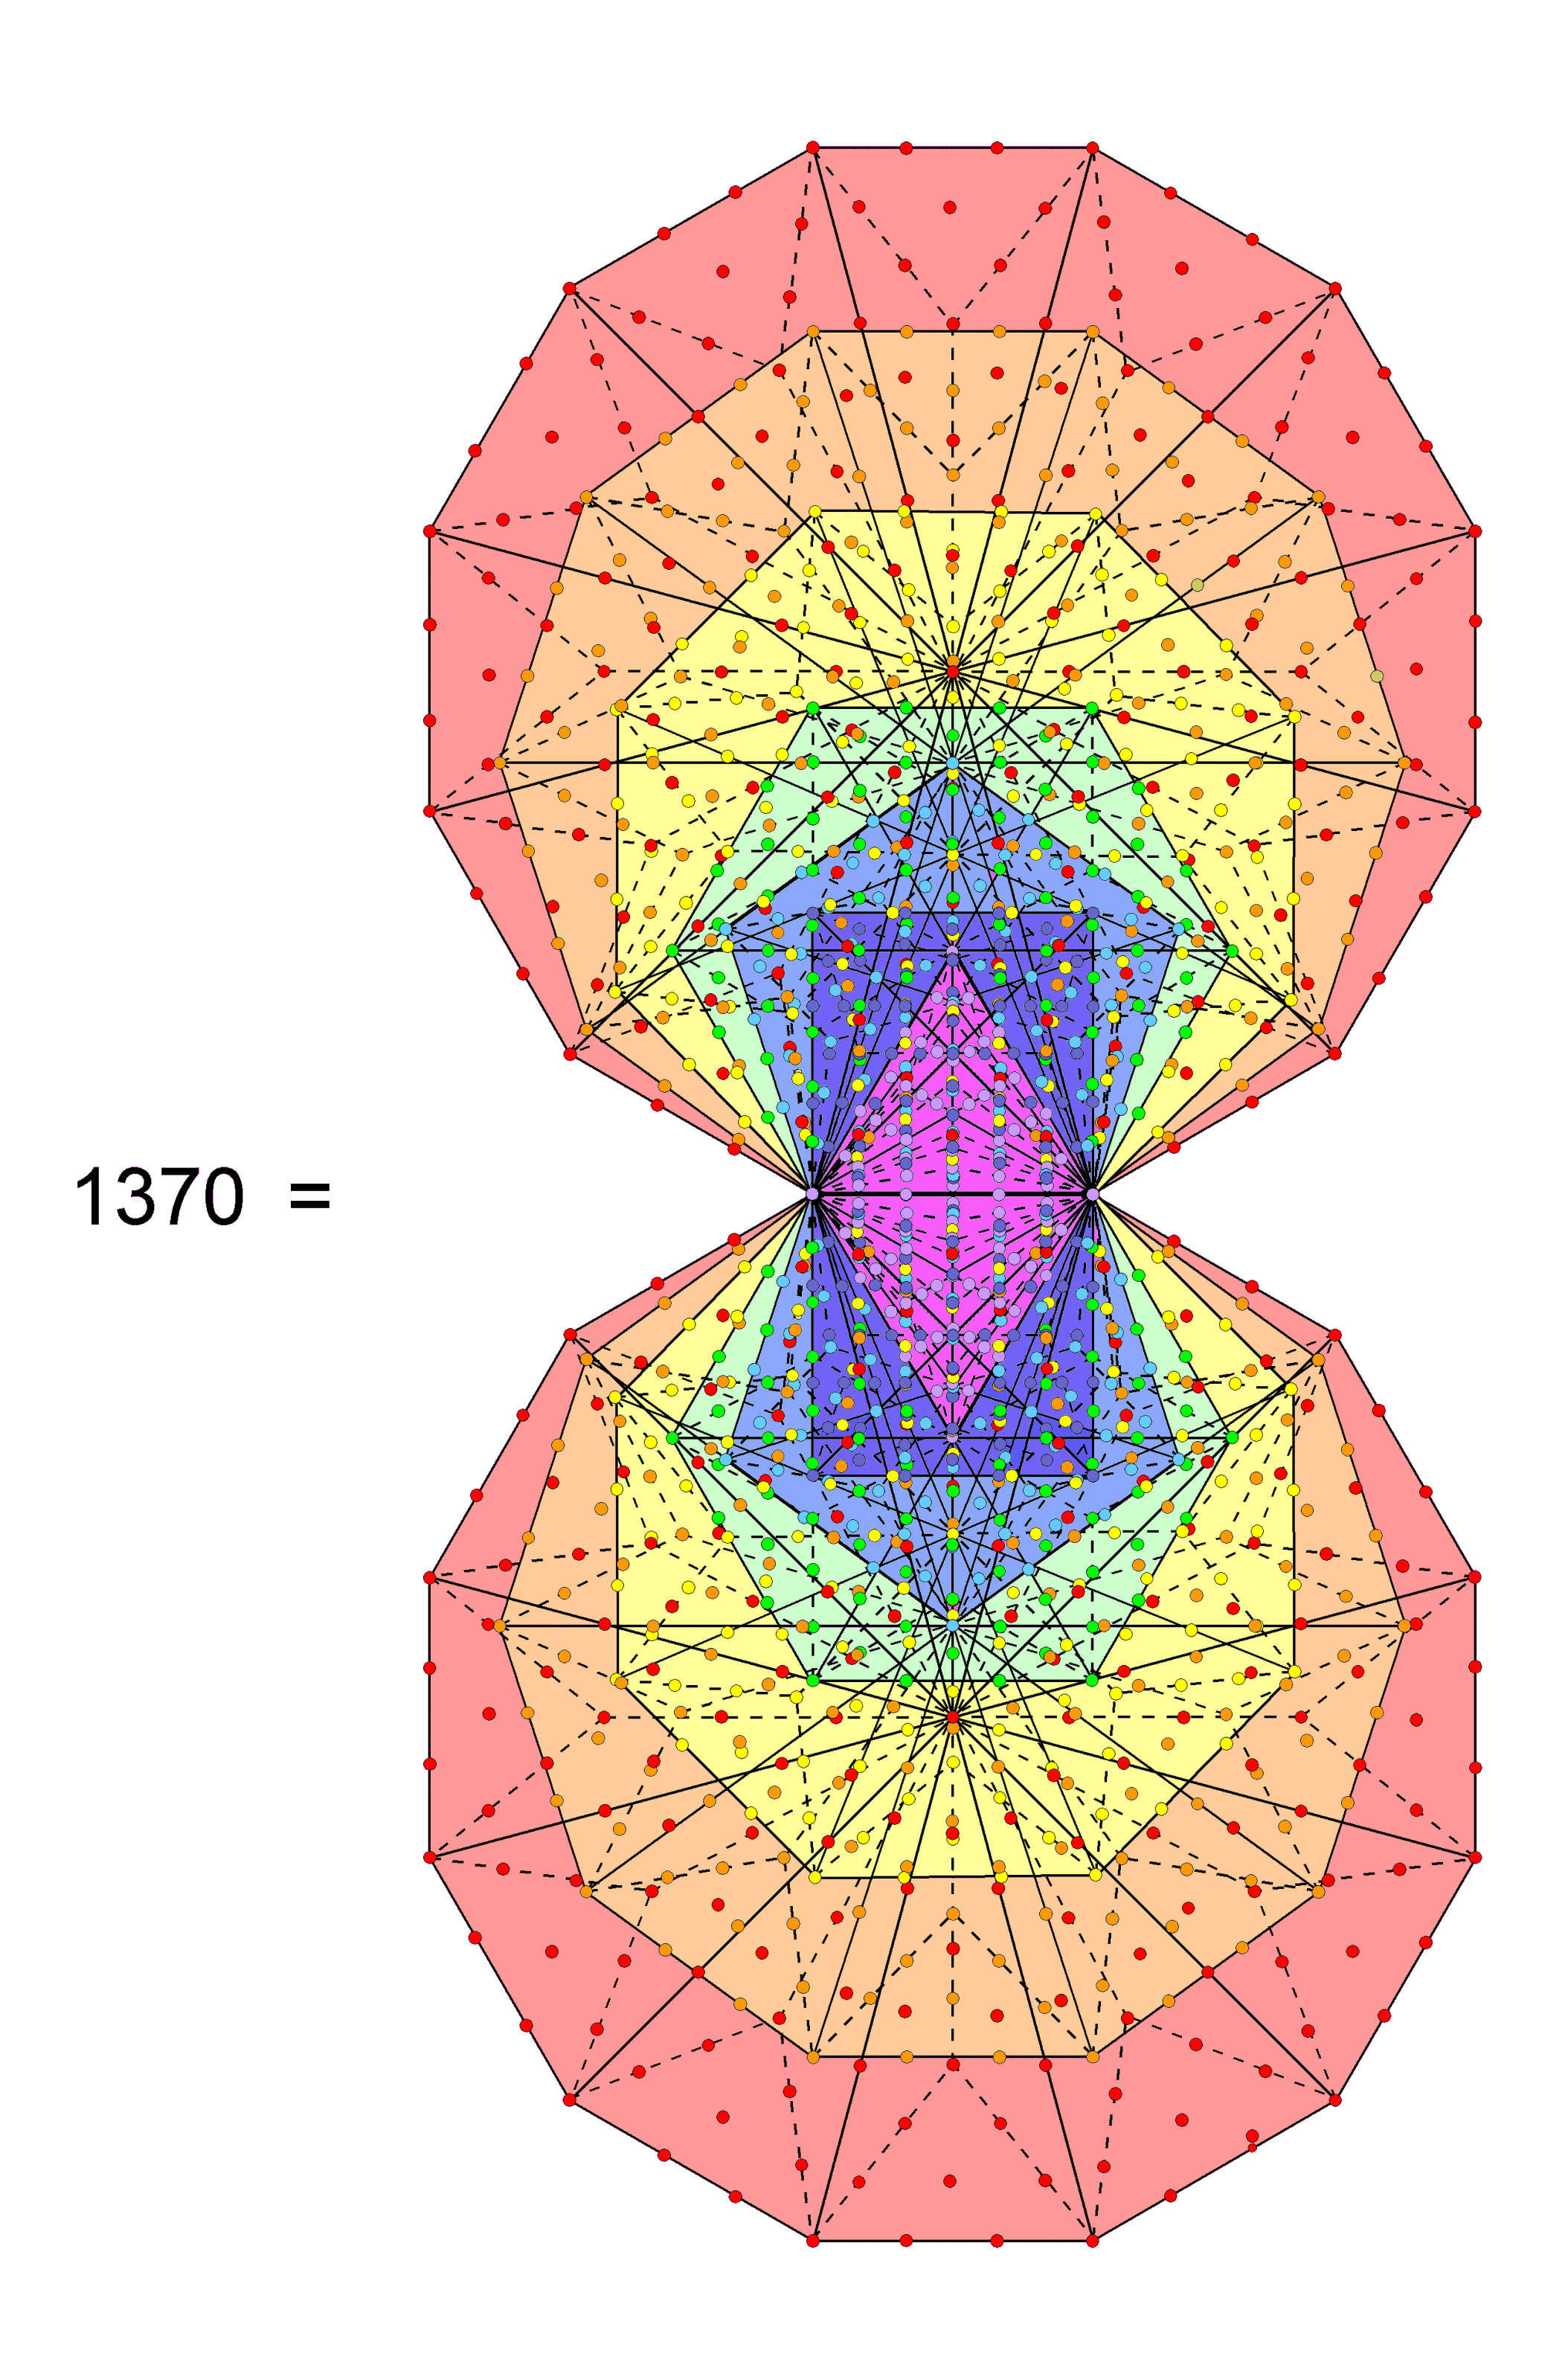 1370 yods in (7+7) Type B polygons